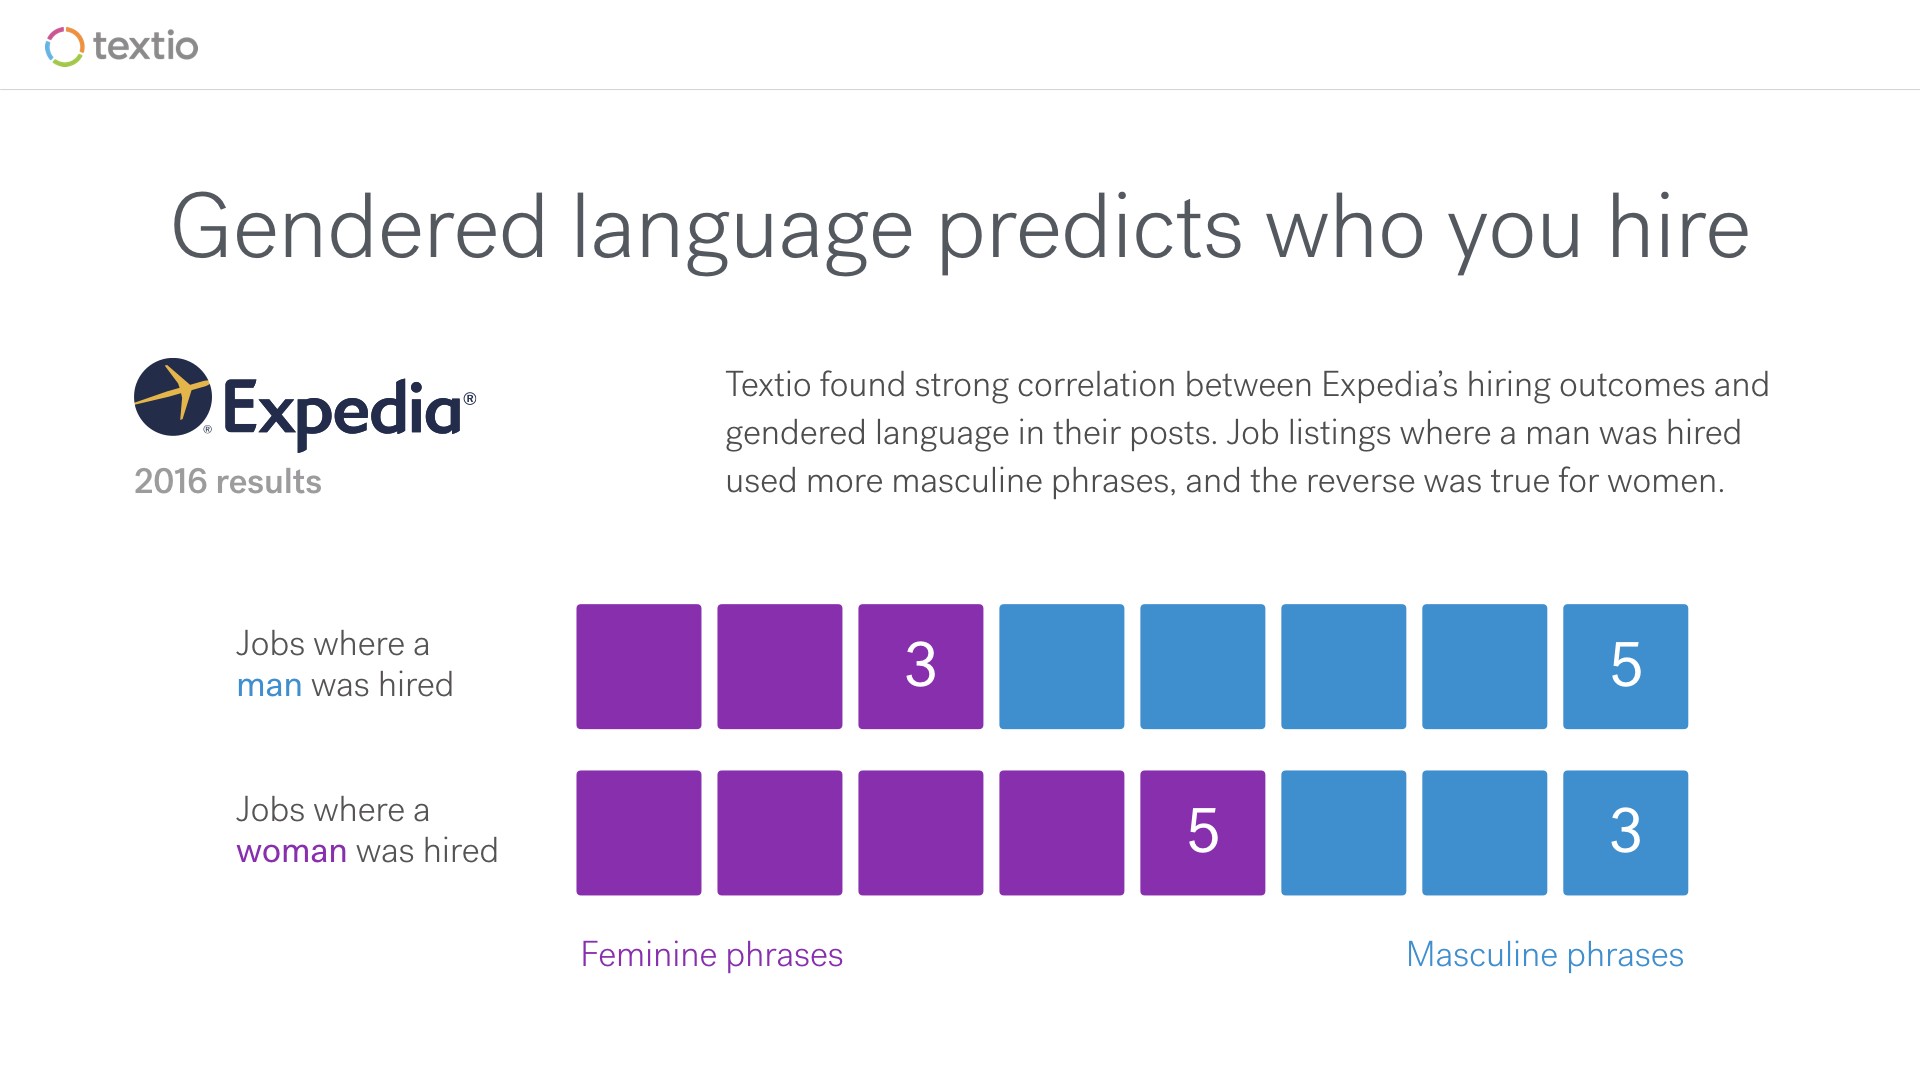 Gendered language predicts who you hire graph with data showing that jobs where a woman was hired had 5 feminine phrases and just 3 masculine phrases and jobs where a man was hired had 5 masculine phrases and just 3 feminine phrases